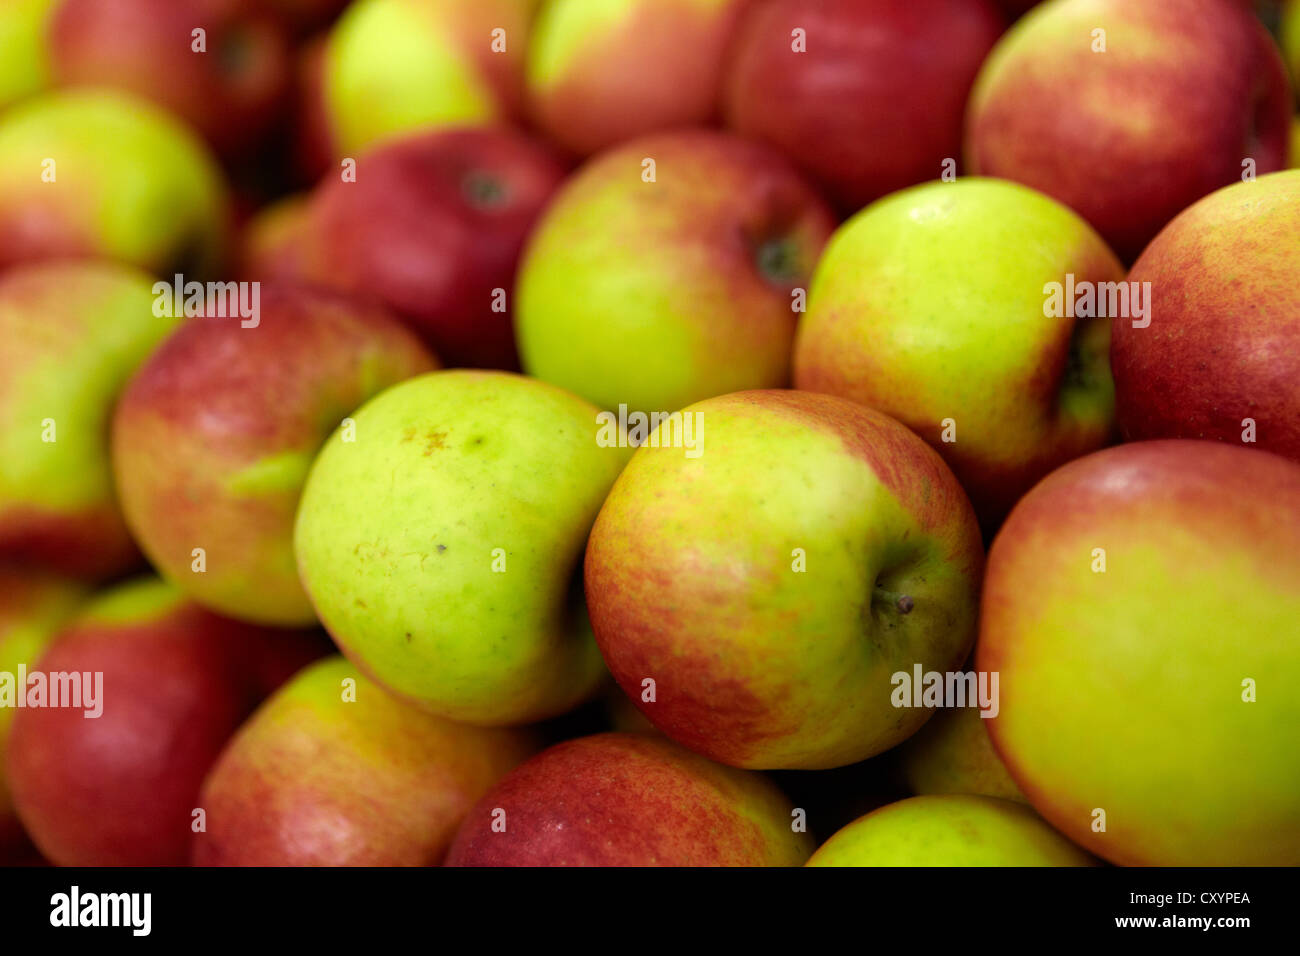 apples organic fruit and vegetable stall Stock Photo